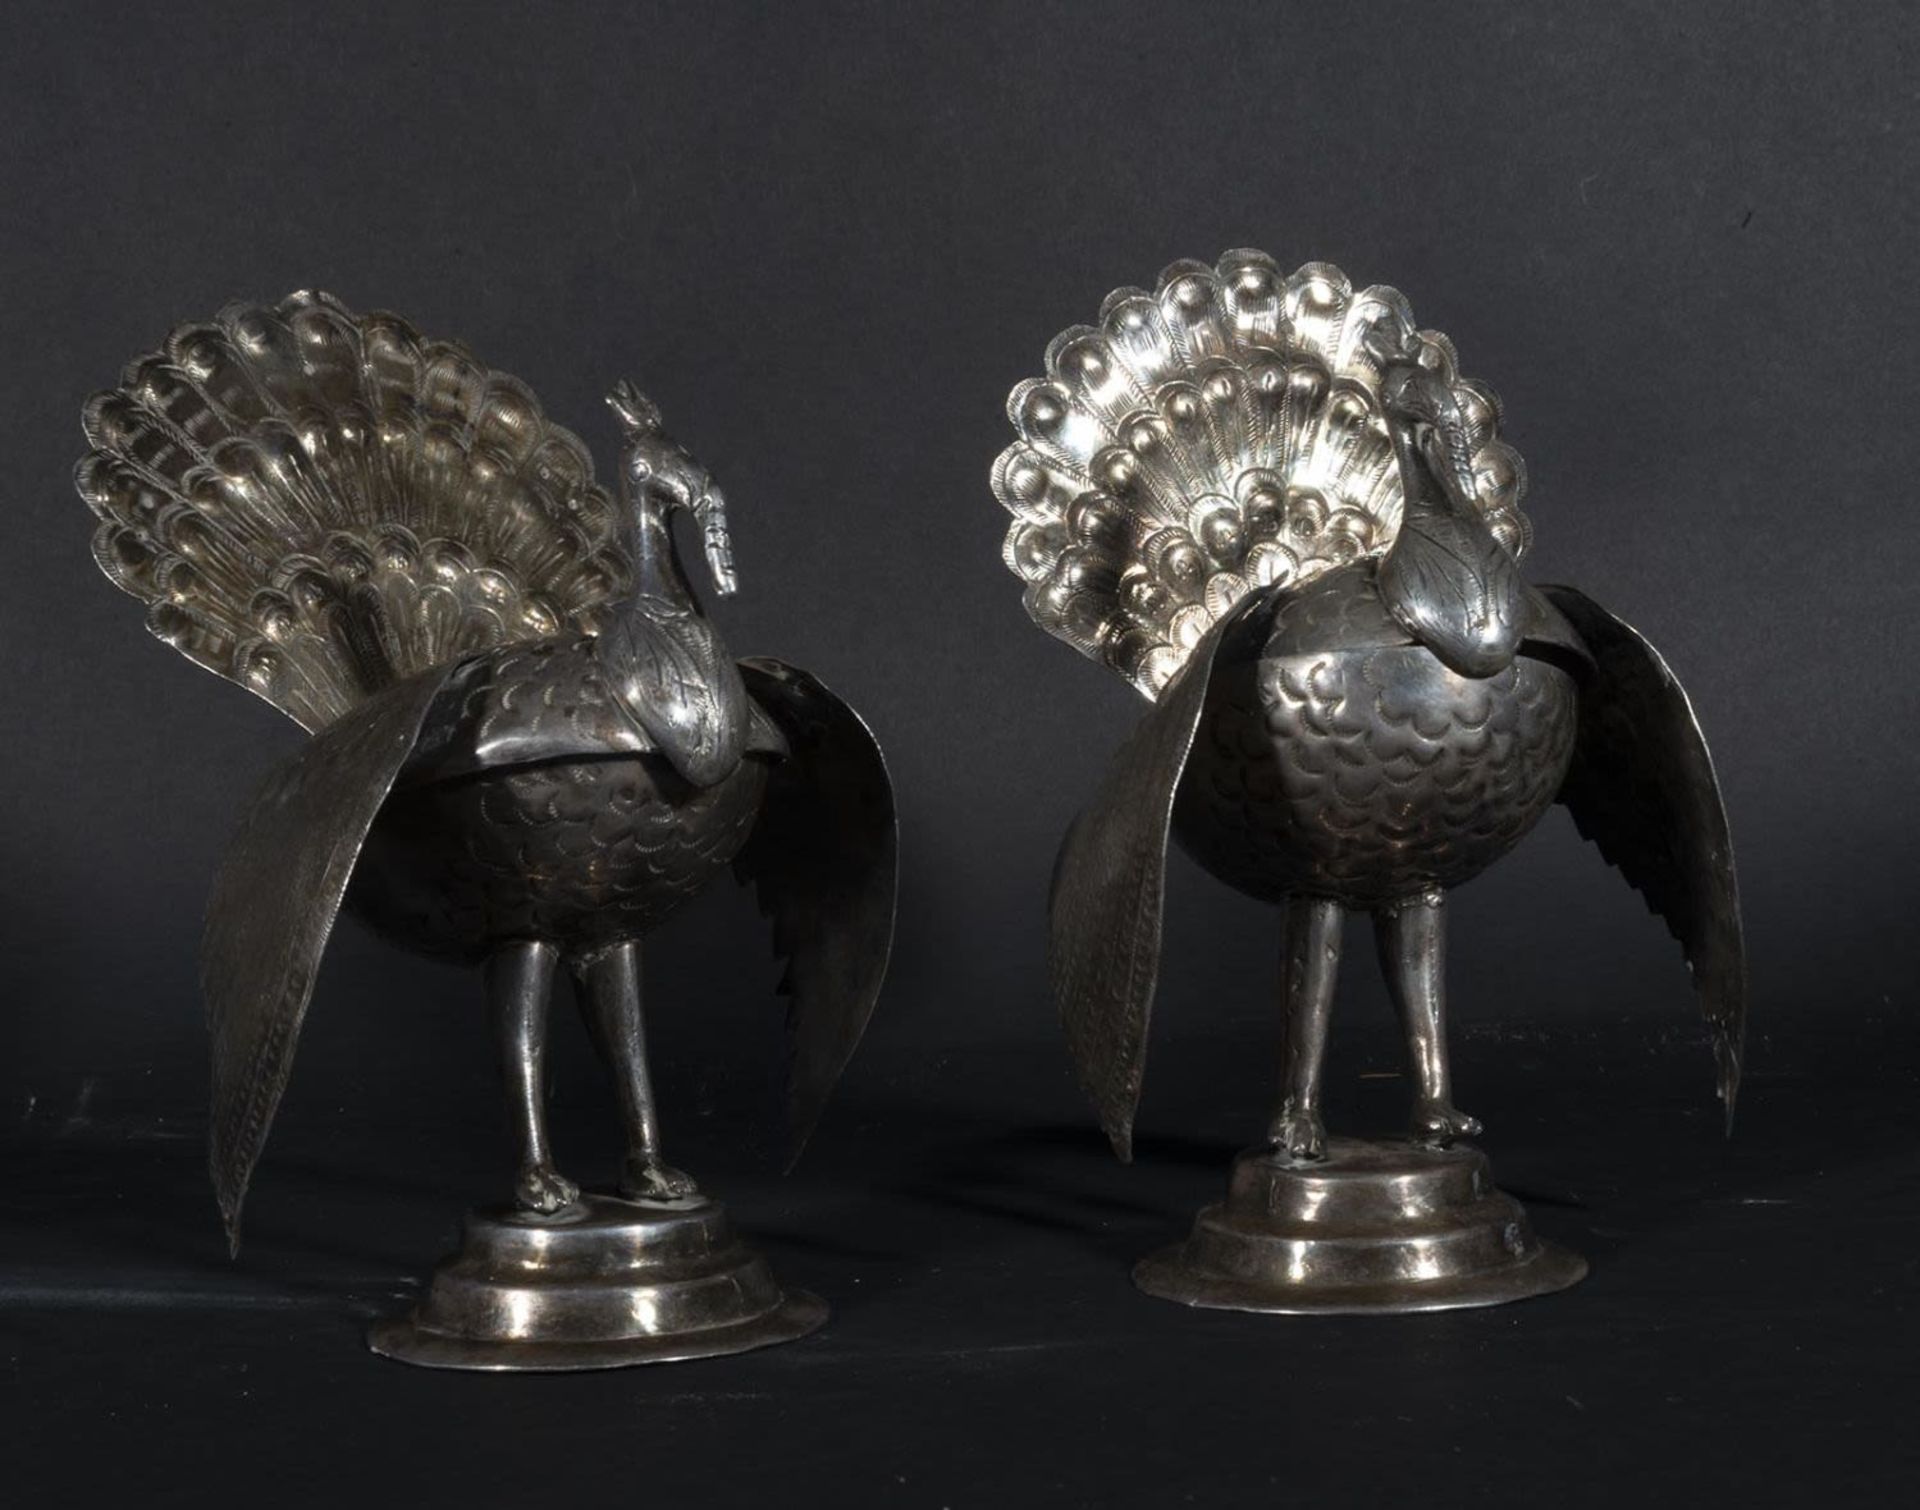 Pair of important "Salt Shakers" or "Especieros" in silver, Peruvian colonial work from the 18th cen